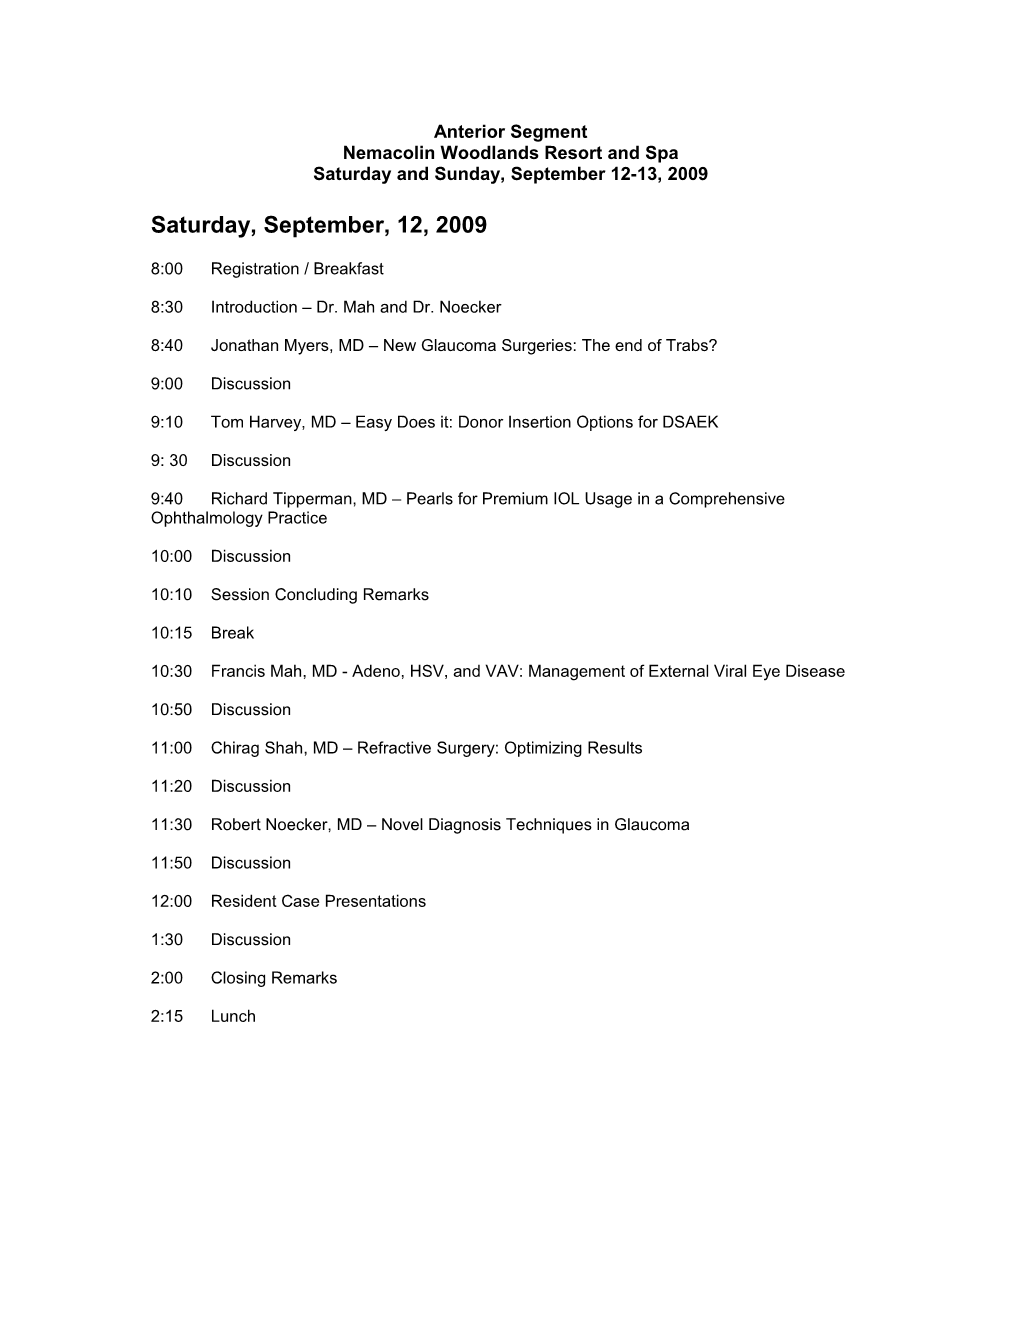 Resident Research/Alumni Day Schedule